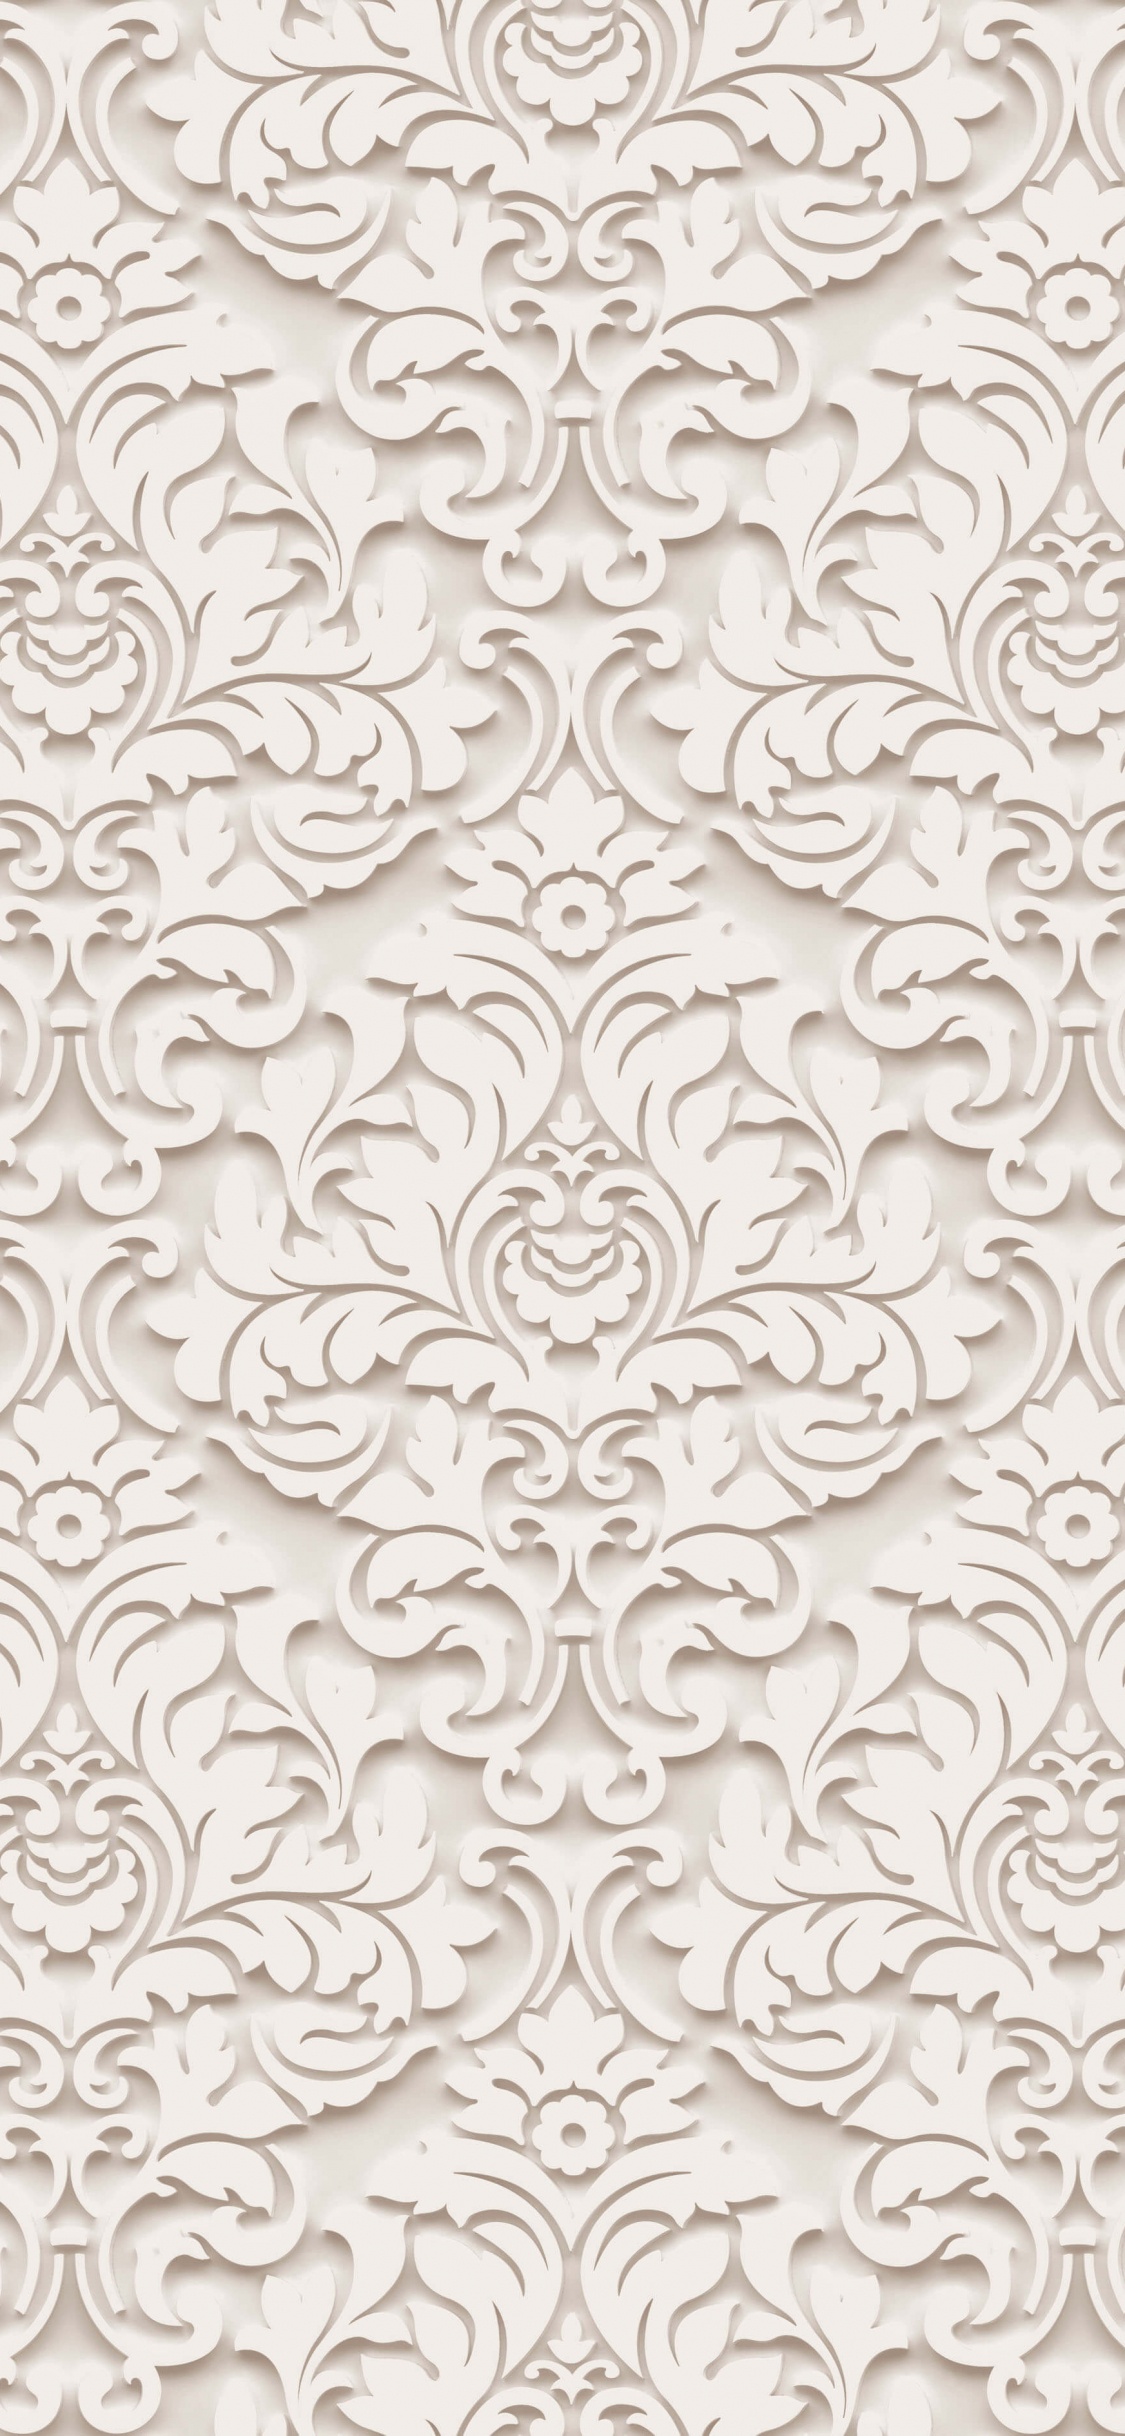 White and Black Floral Textile. Wallpaper in 1125x2436 Resolution